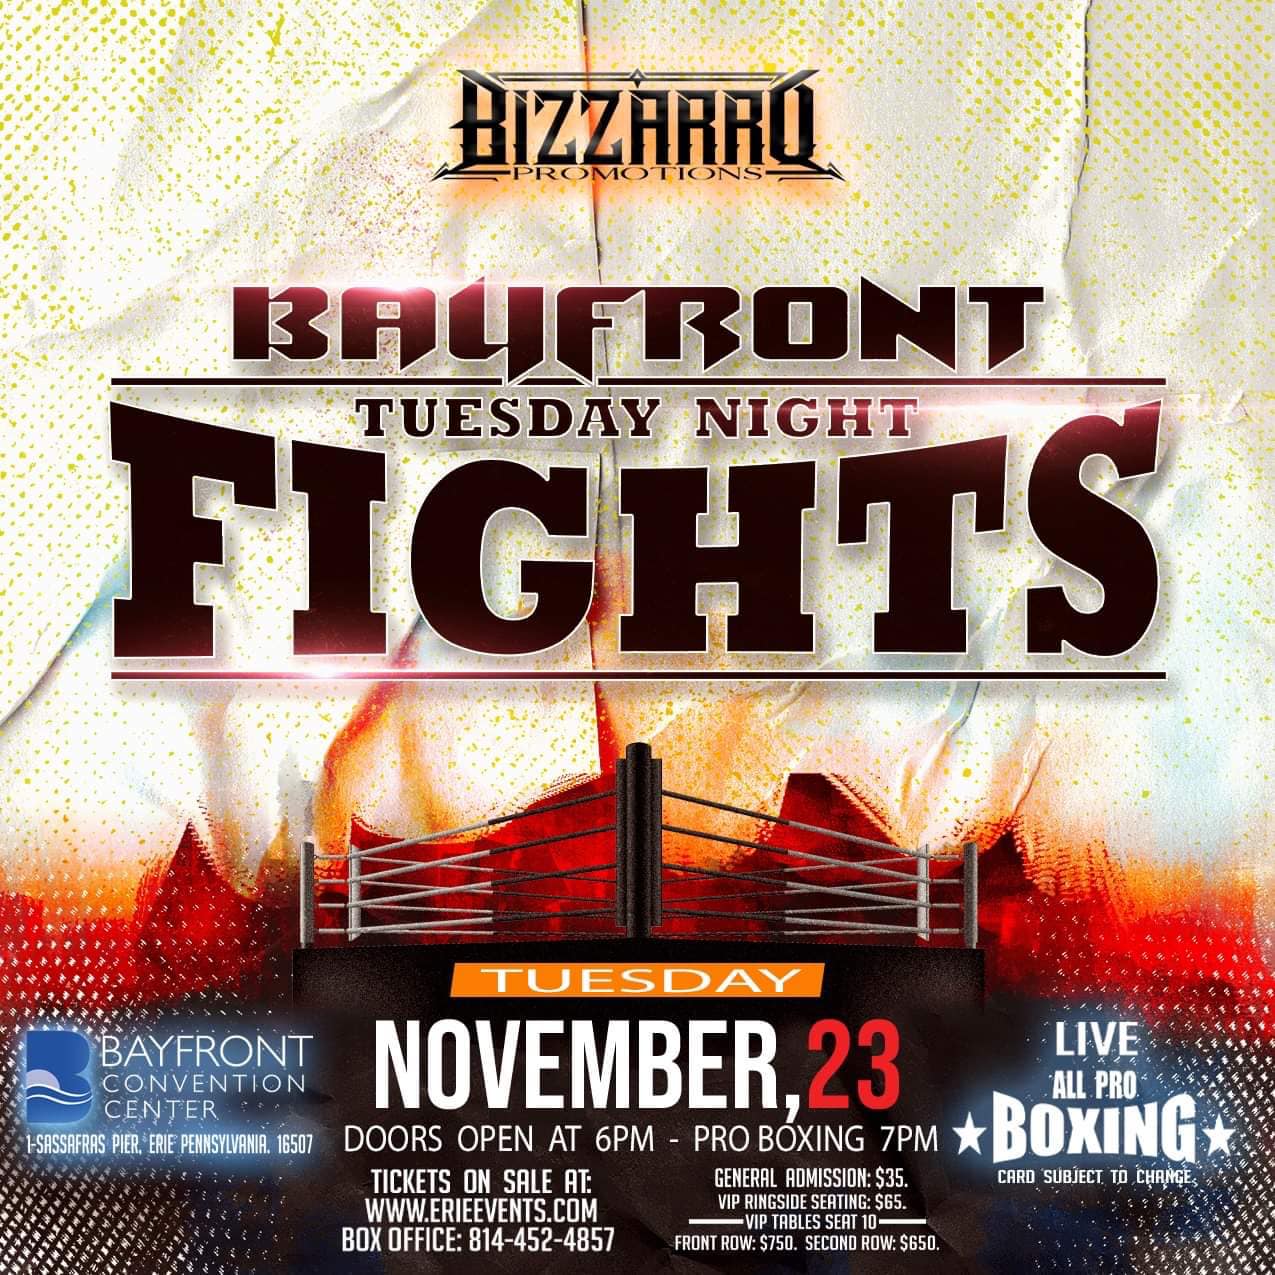 Erie Sports 2021: Bizzarro Promotions Presents Bayfront Tuesday Night ...